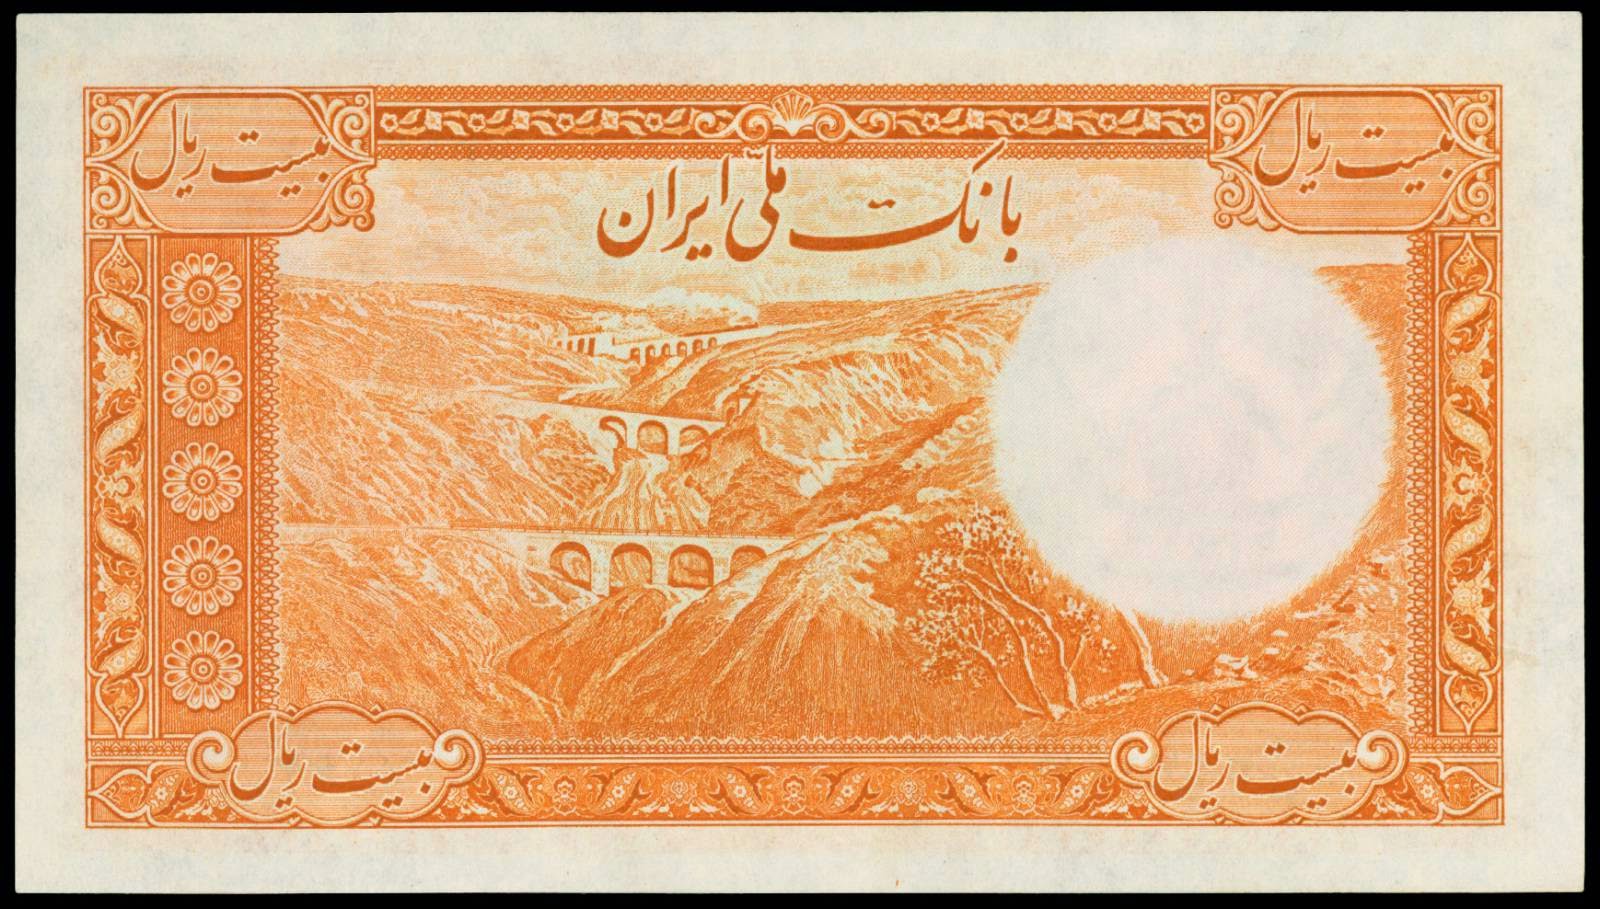 Iran money currency 20 Rials banknote 1938